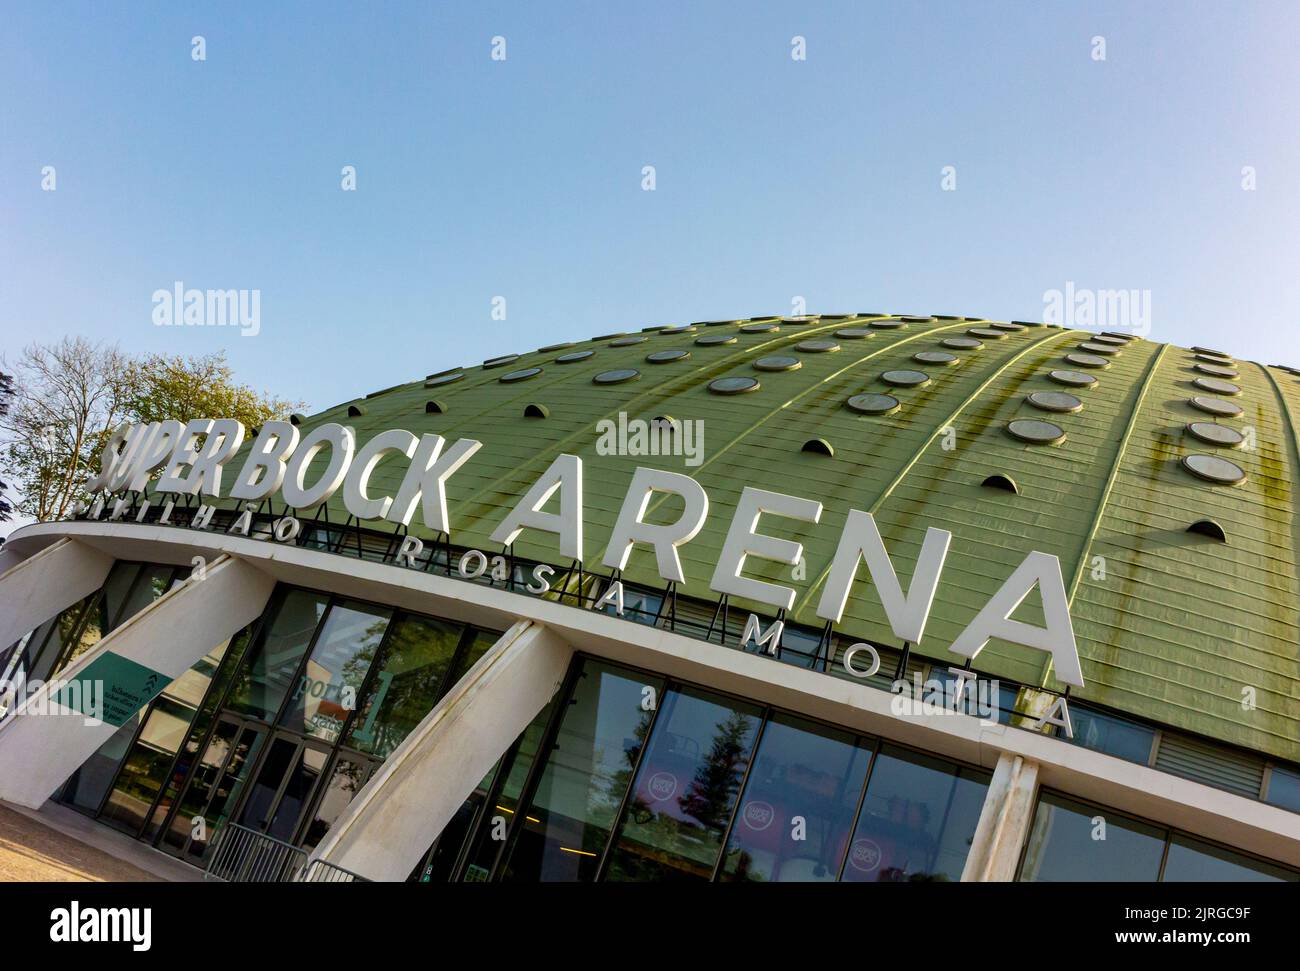 The Super Bock Arena or Pavilhão Rosa Mota a cultural and sports arena in Porto, Portugal originally built in 1954 and restored in 2019. Stock Photo